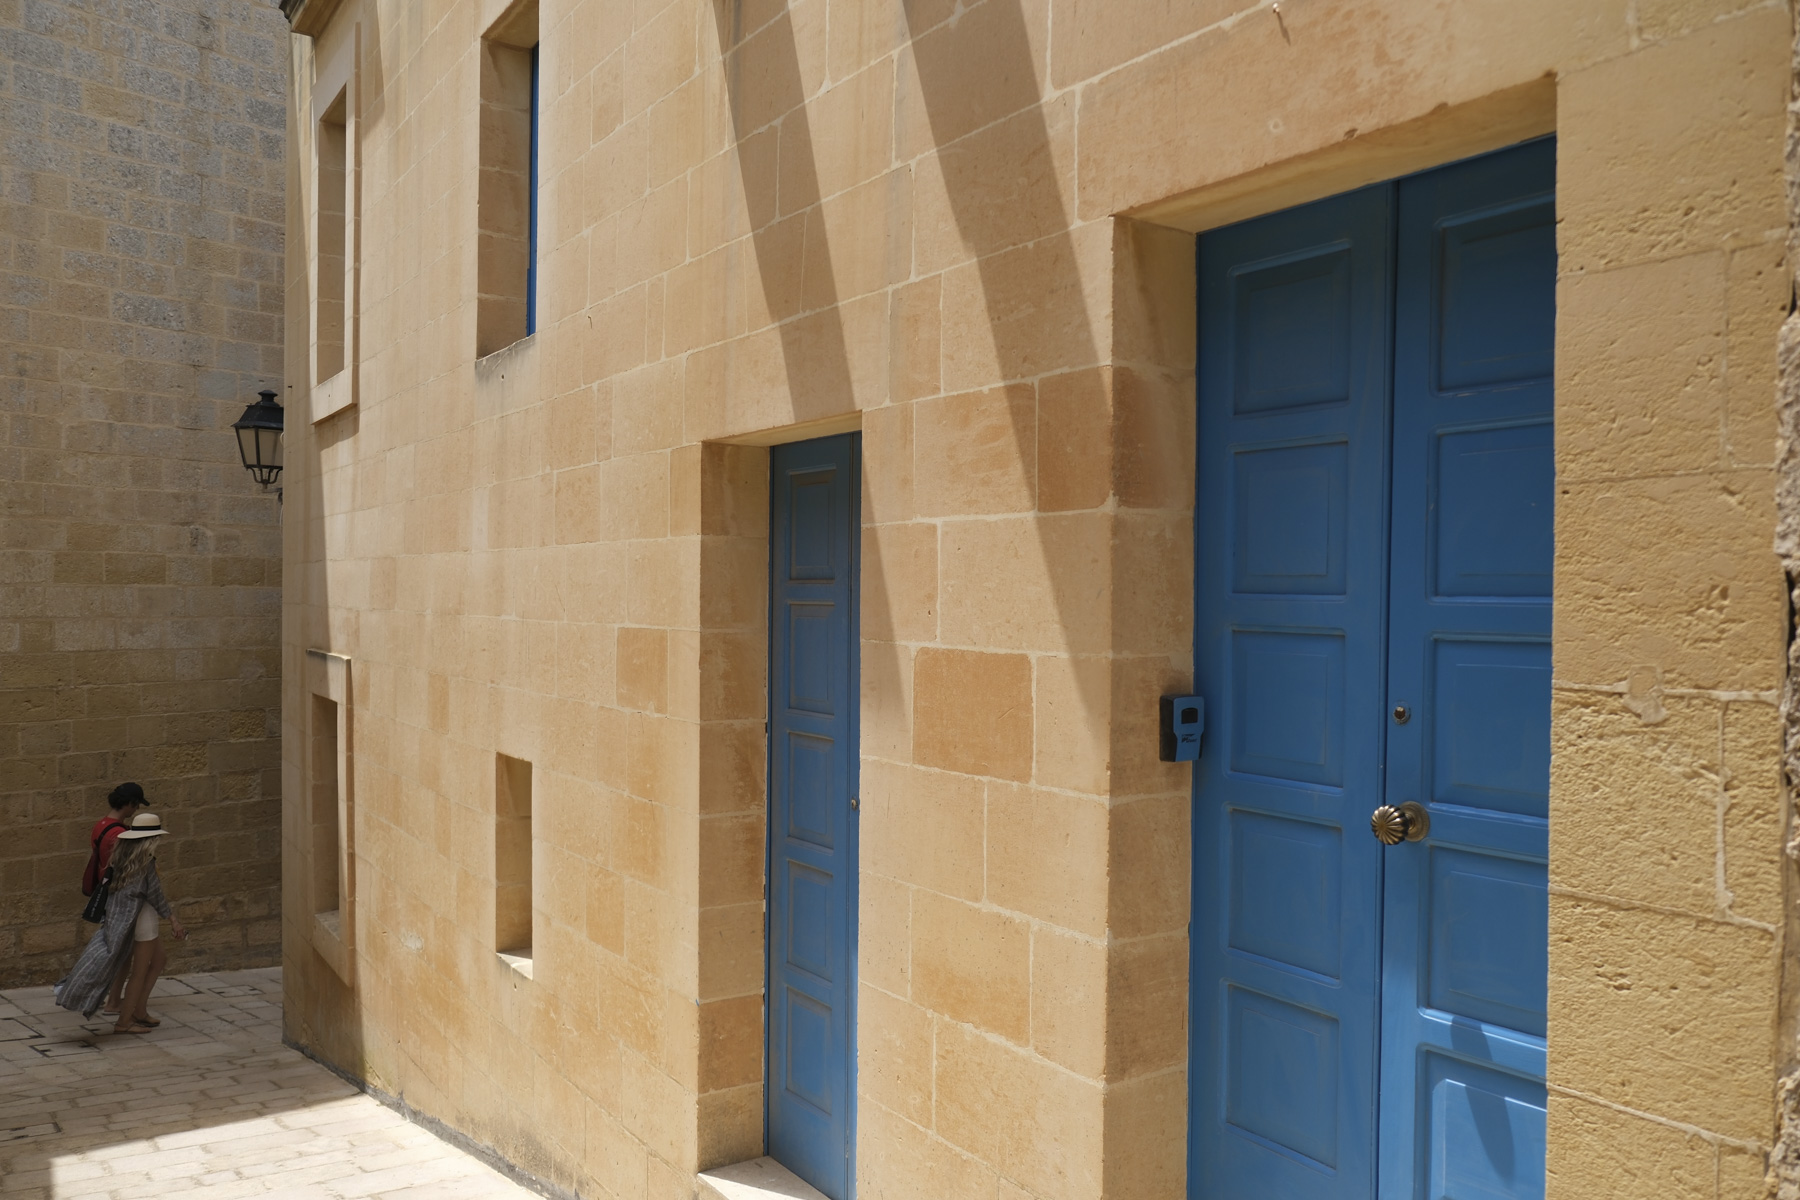 Vibrant blue doors and honey-coloured walls in ancient mediterranean town